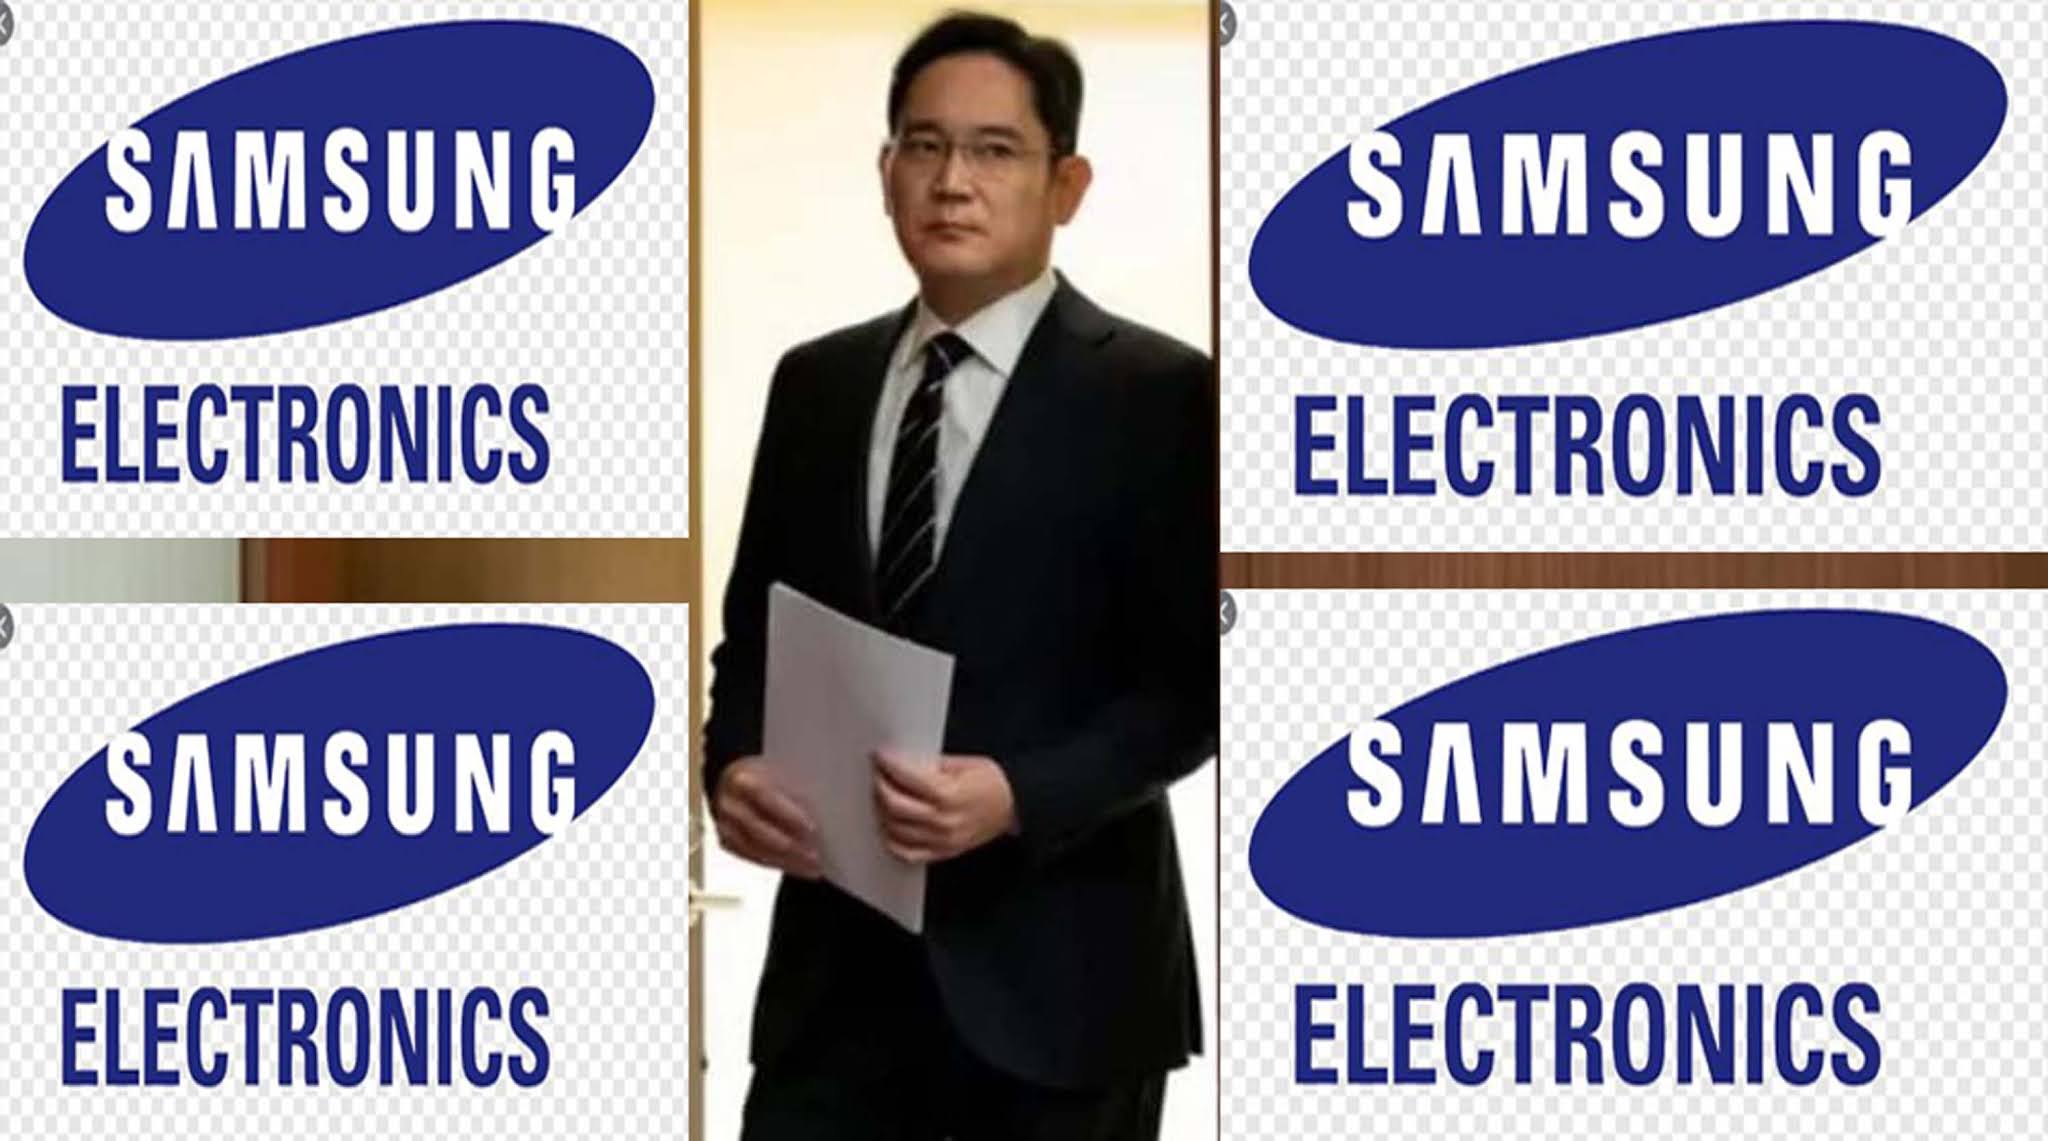 Samsung Vice President faces a nine-year sentence for taking bribes